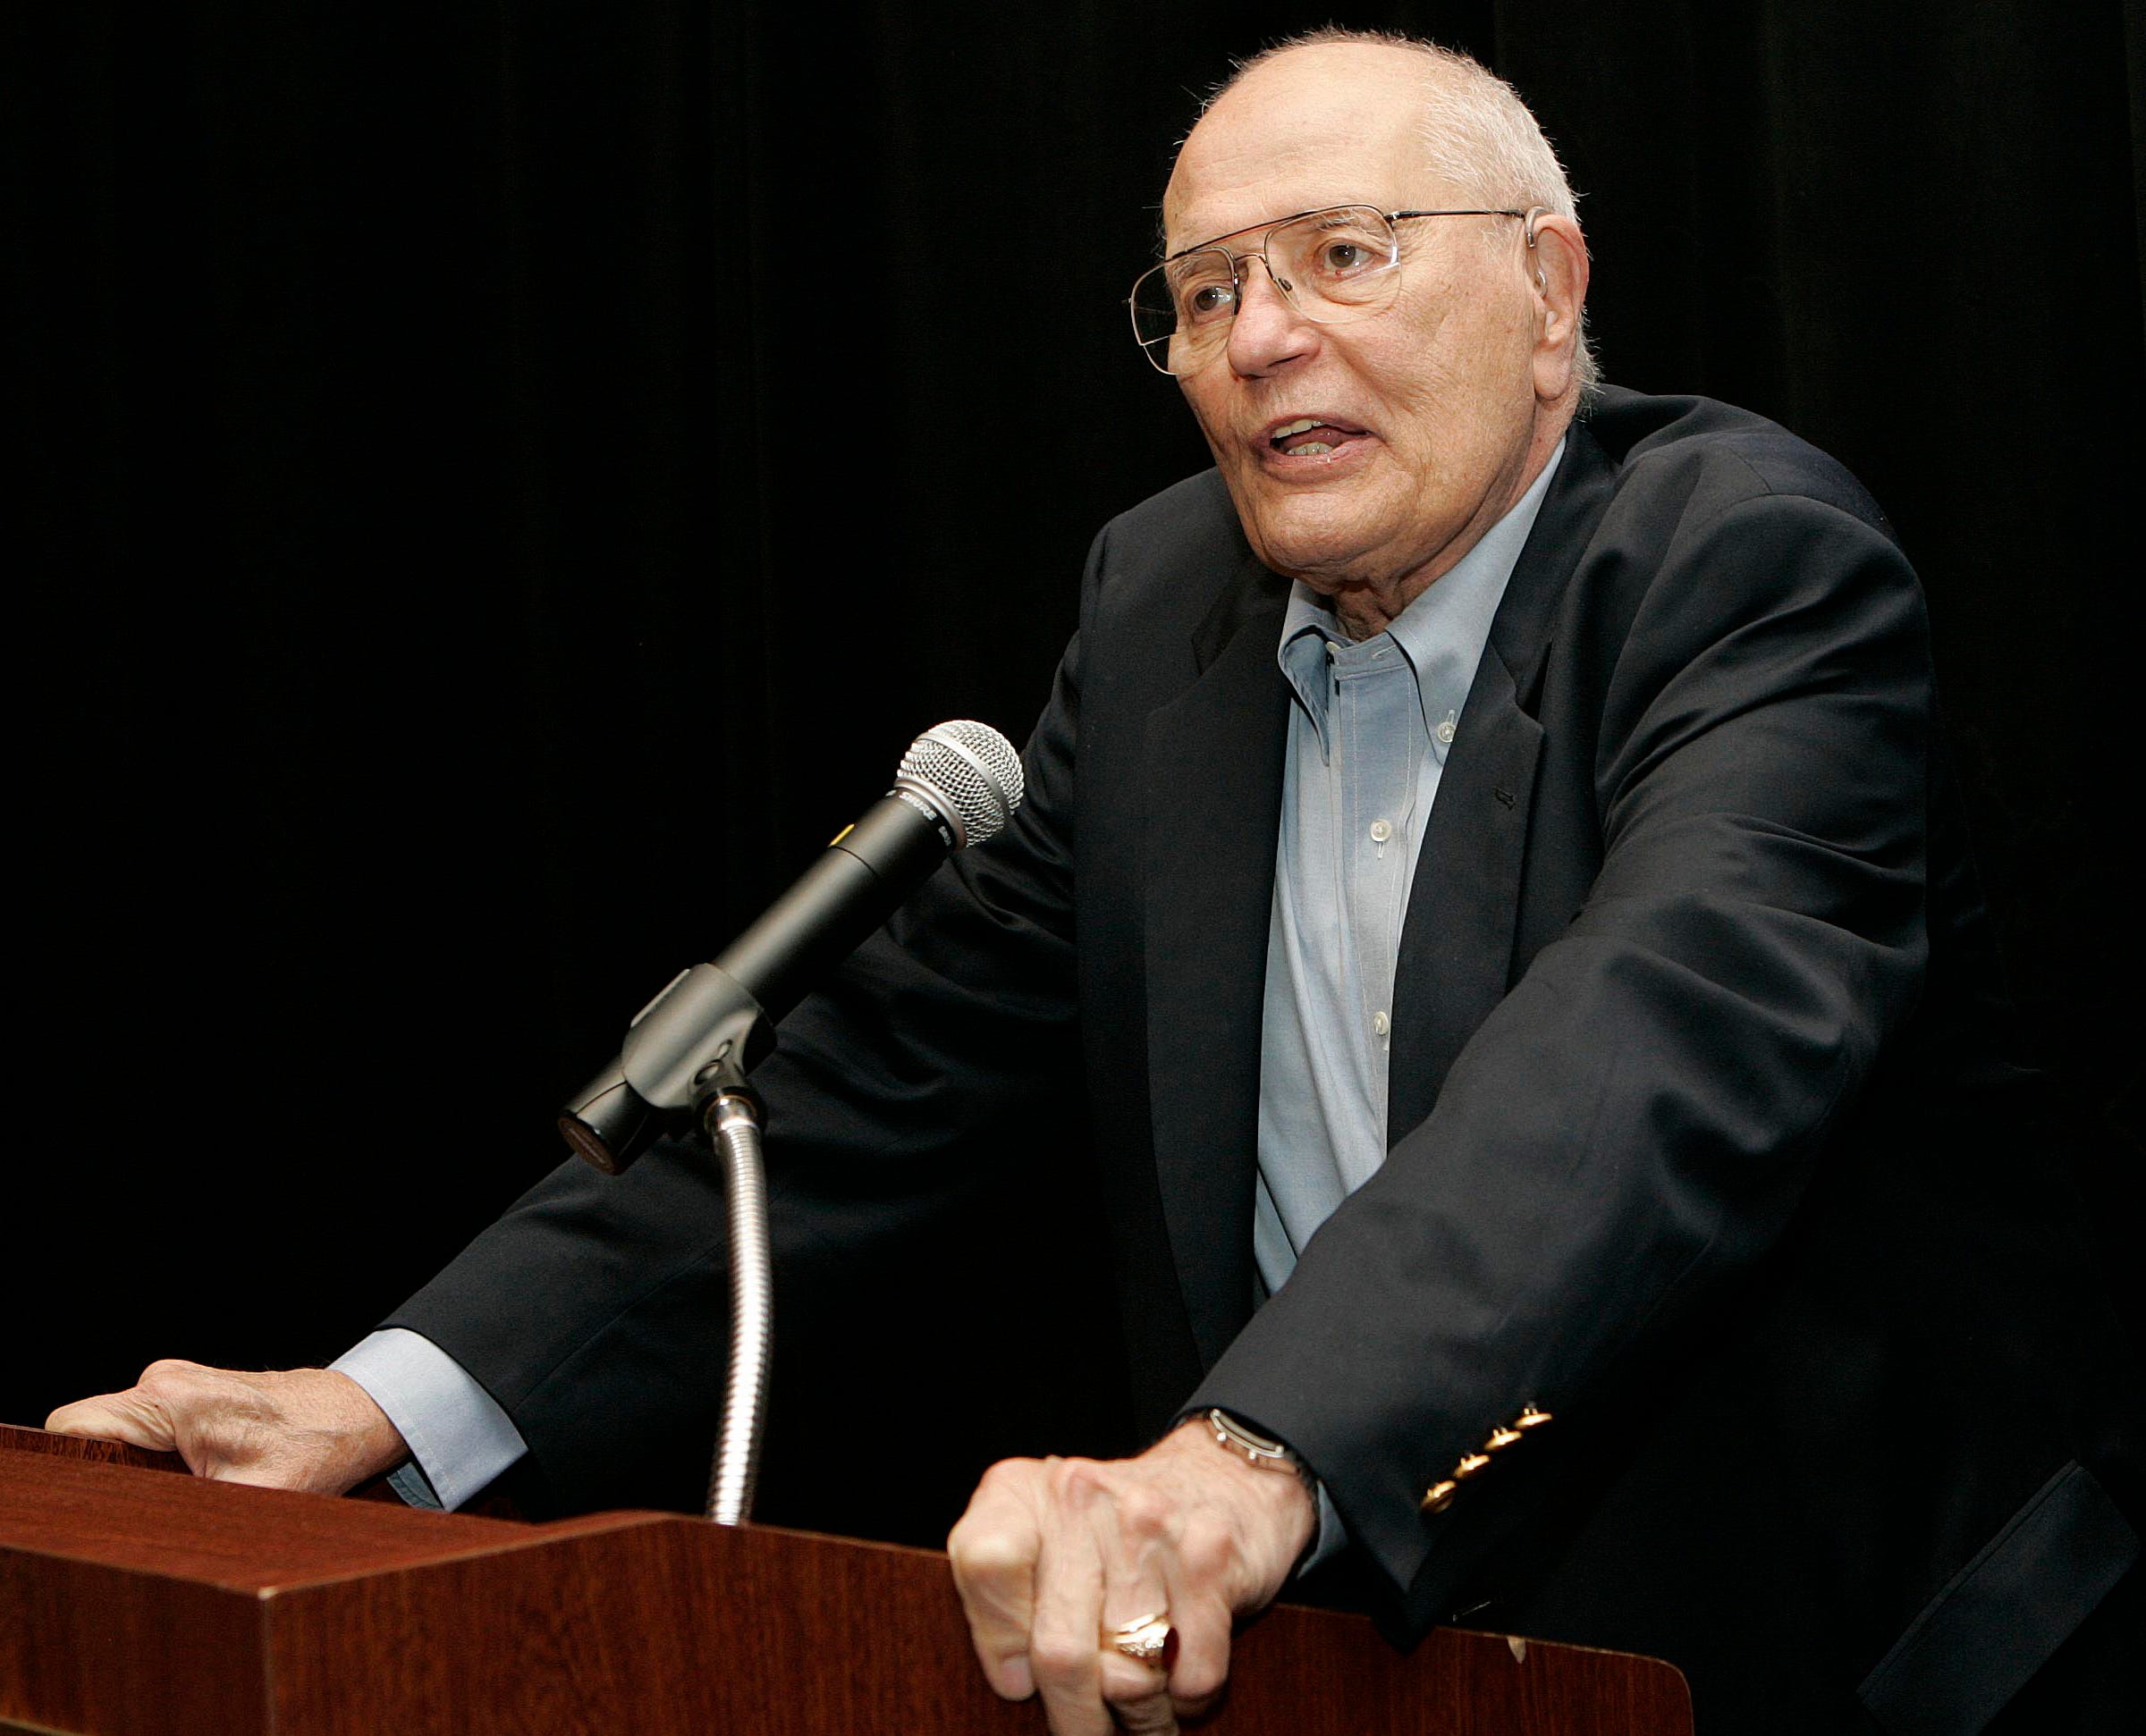 At the 2008 Democratic Convention in Denver, Dingell speaks at a breakfast meeting and rally for the Michigan delegates, before they return home to get out the vote for presidential candidate Barack Obama.